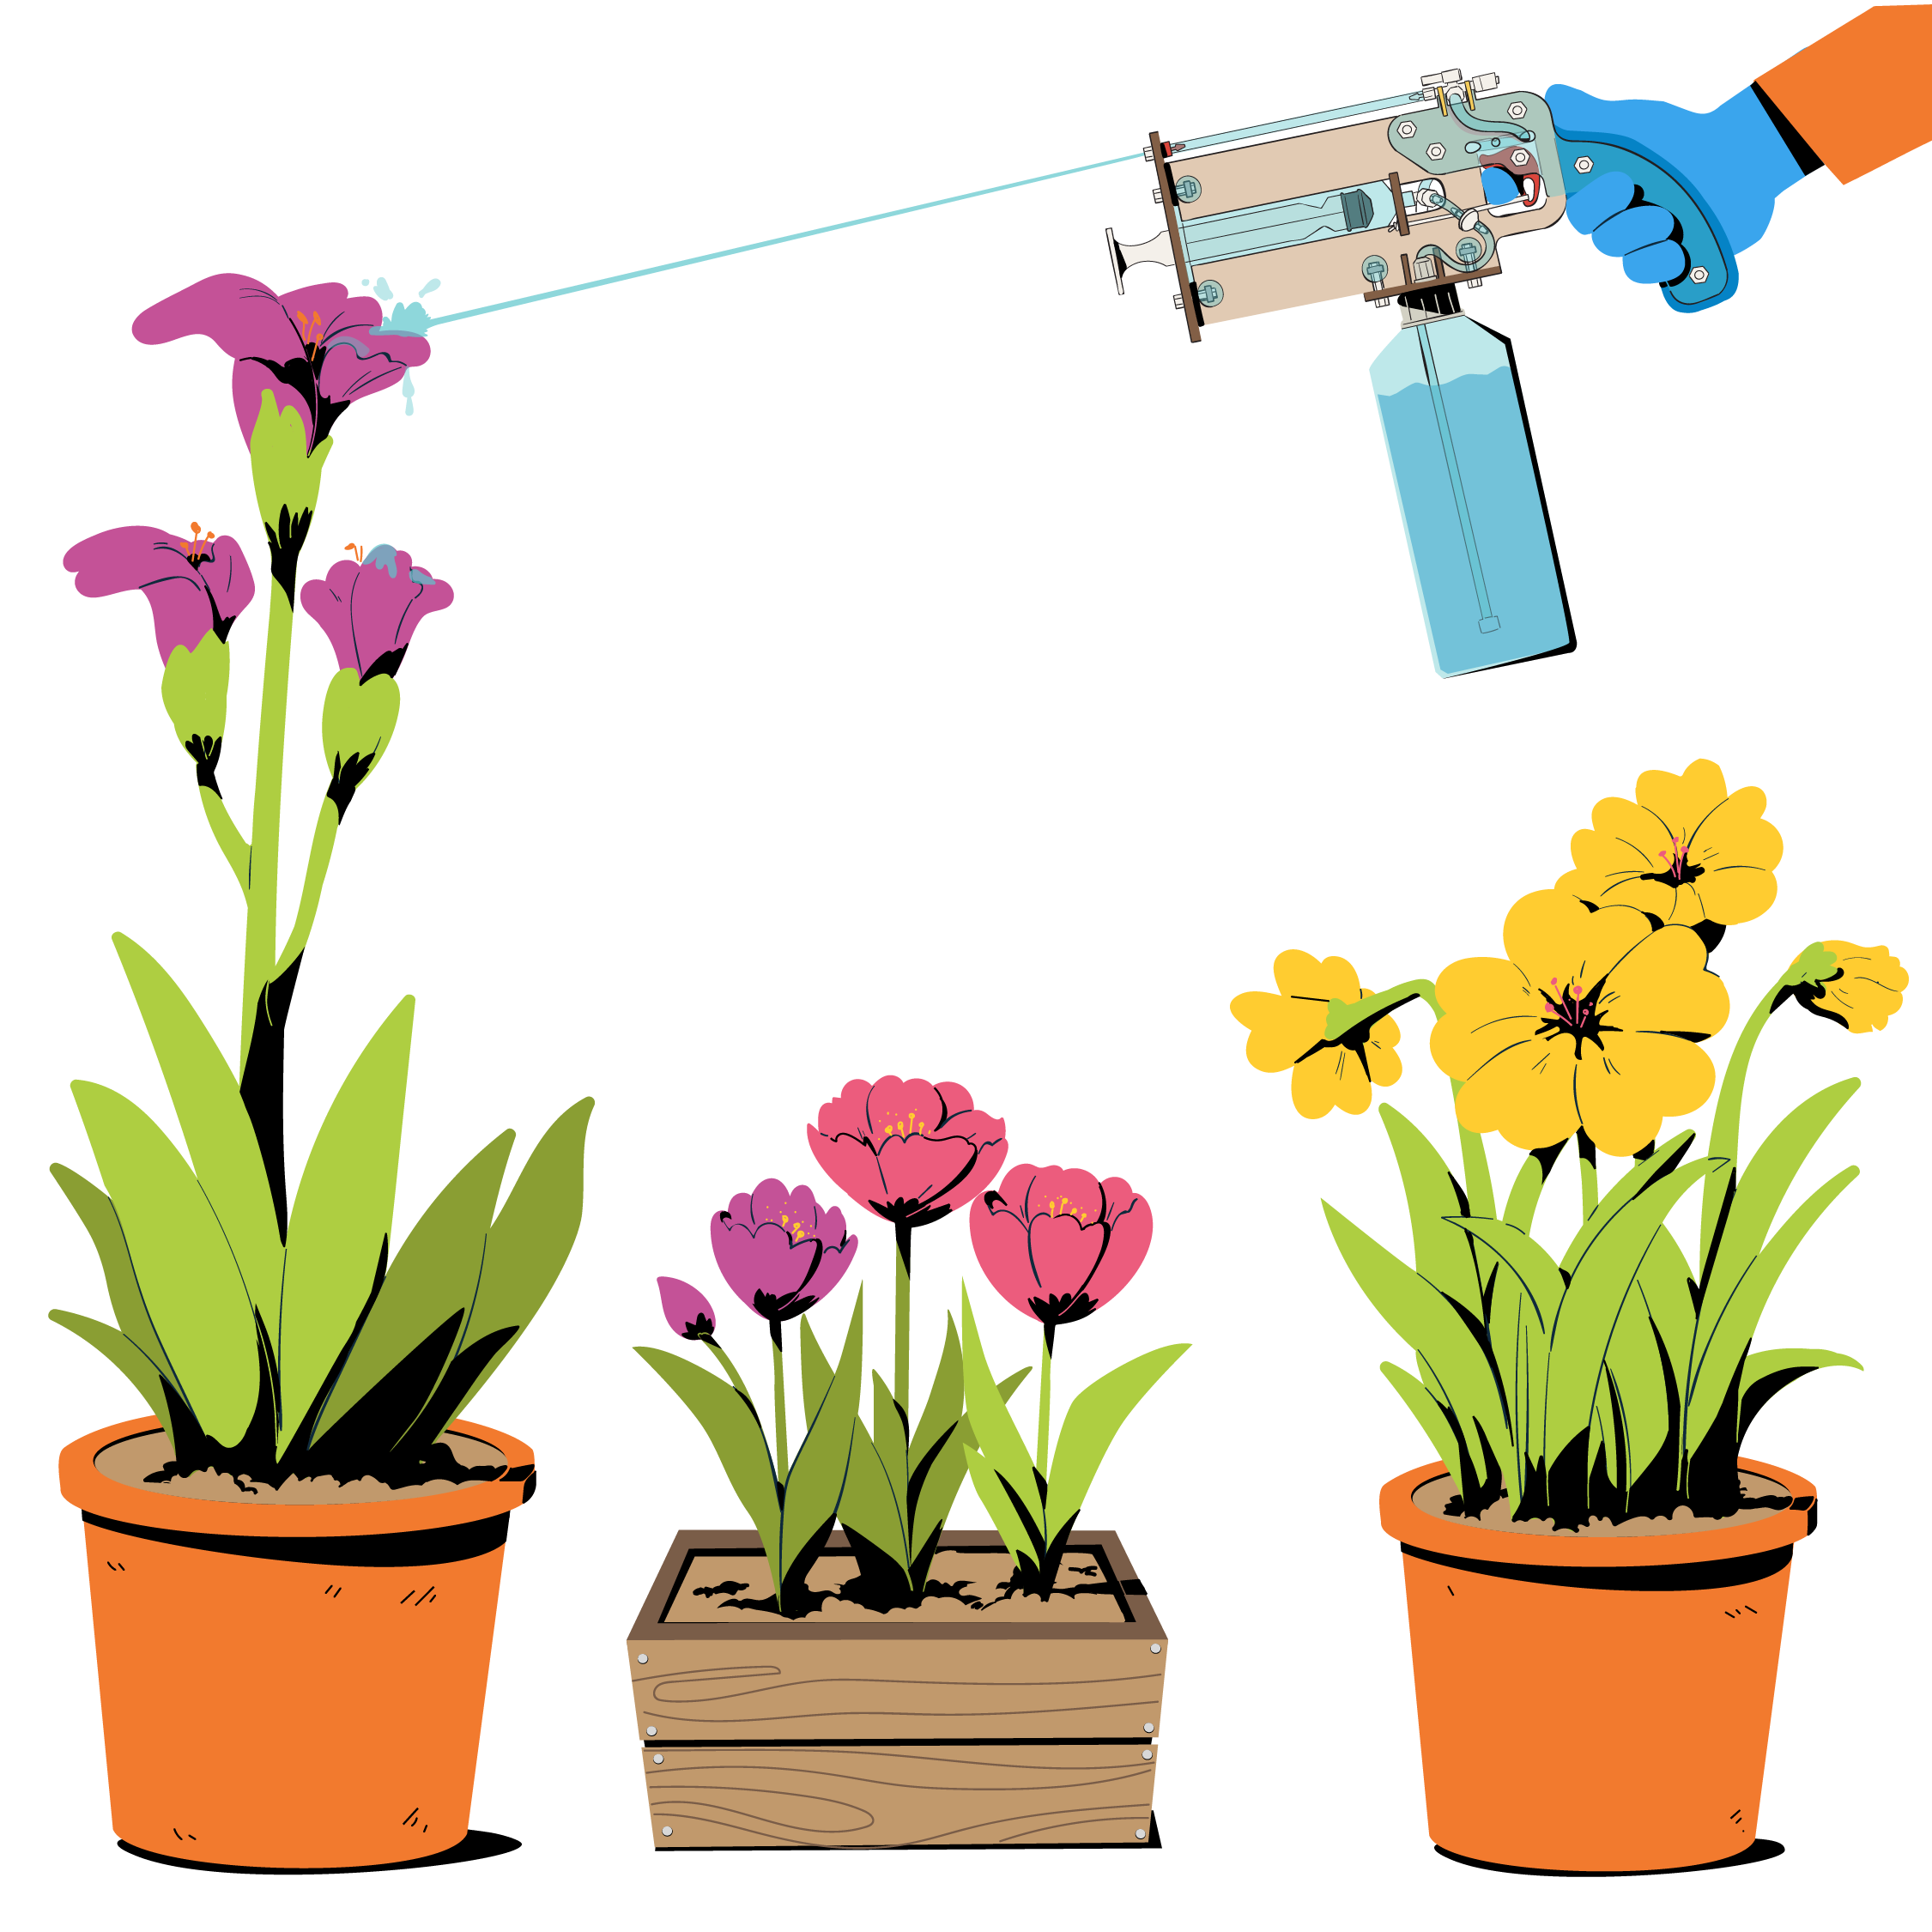 A drawing of three sets of flowers planted in pots. One pot is being watered by the Wet Bandit, a squirt gun.